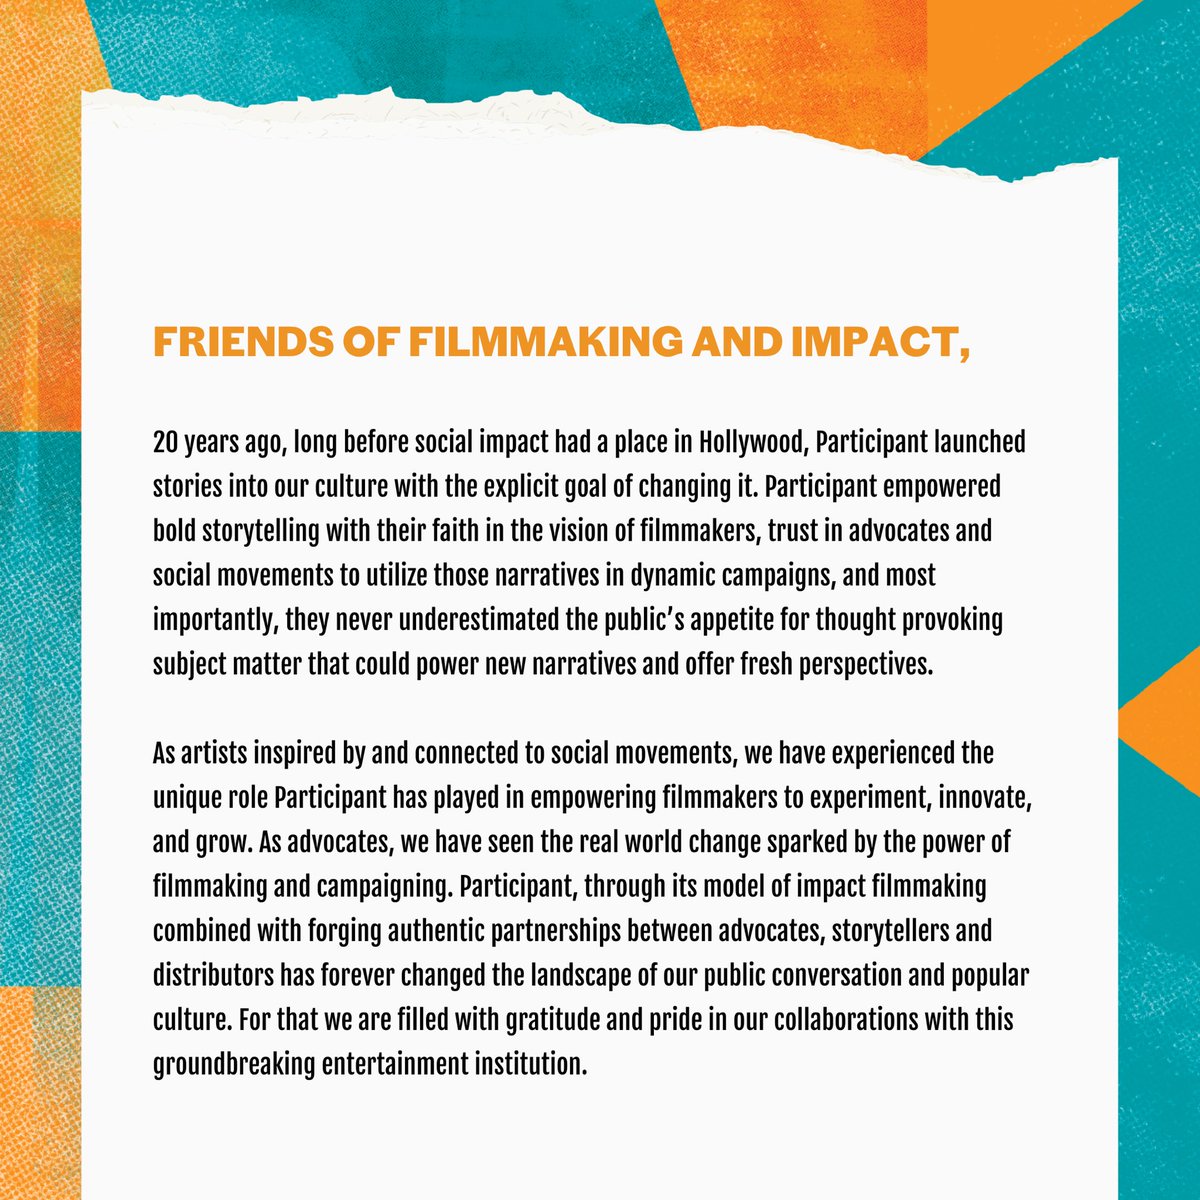 BREAKING: In partnership with over 120 leading actors, directors, advocates, and nonprofit organizations we released an open letter calling on Hollywood to prioritize social impact in the wake of @Participant’s closure. Read the full letter: domesticworkers.org/culture-change…